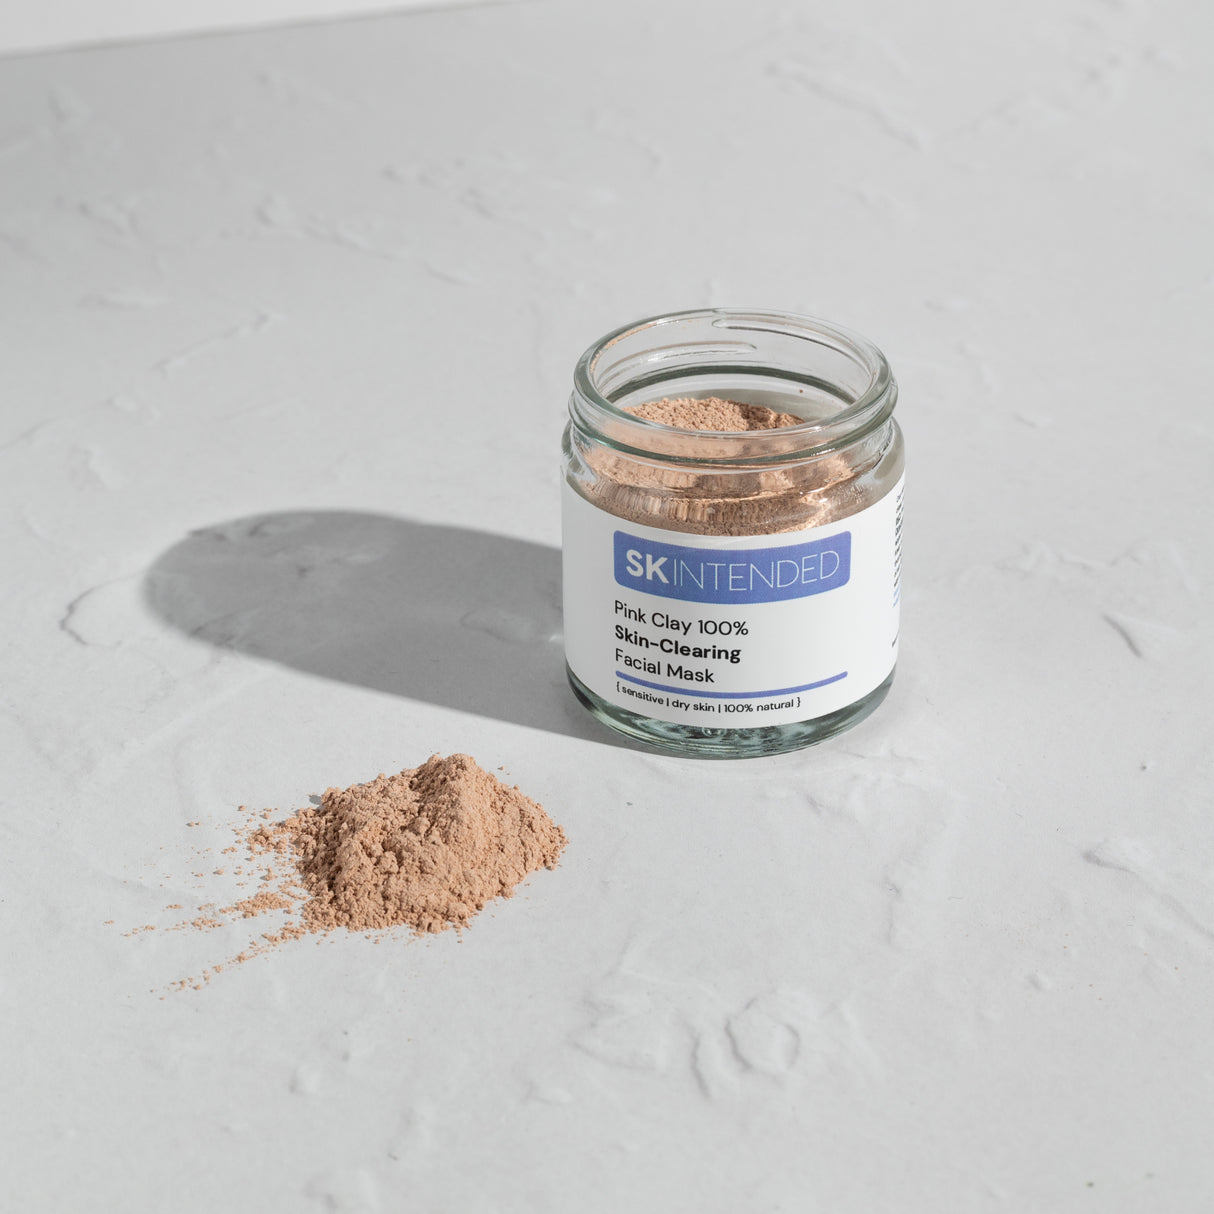 Skintended Pink Clay 100% Skin-Clearing Facial Mask